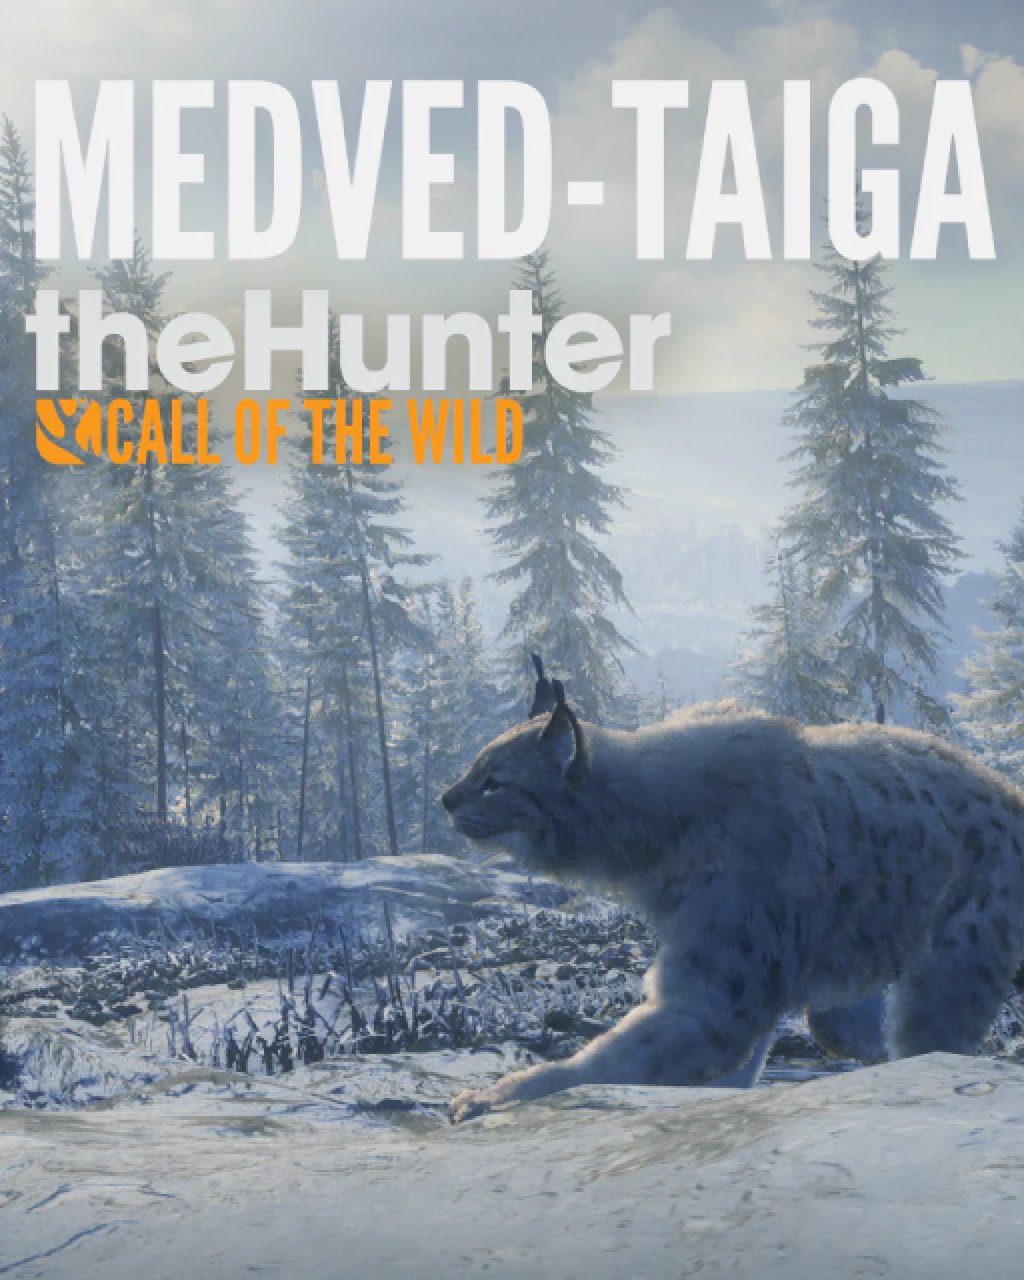 theHunter Call of the Wild Medved-Taiga